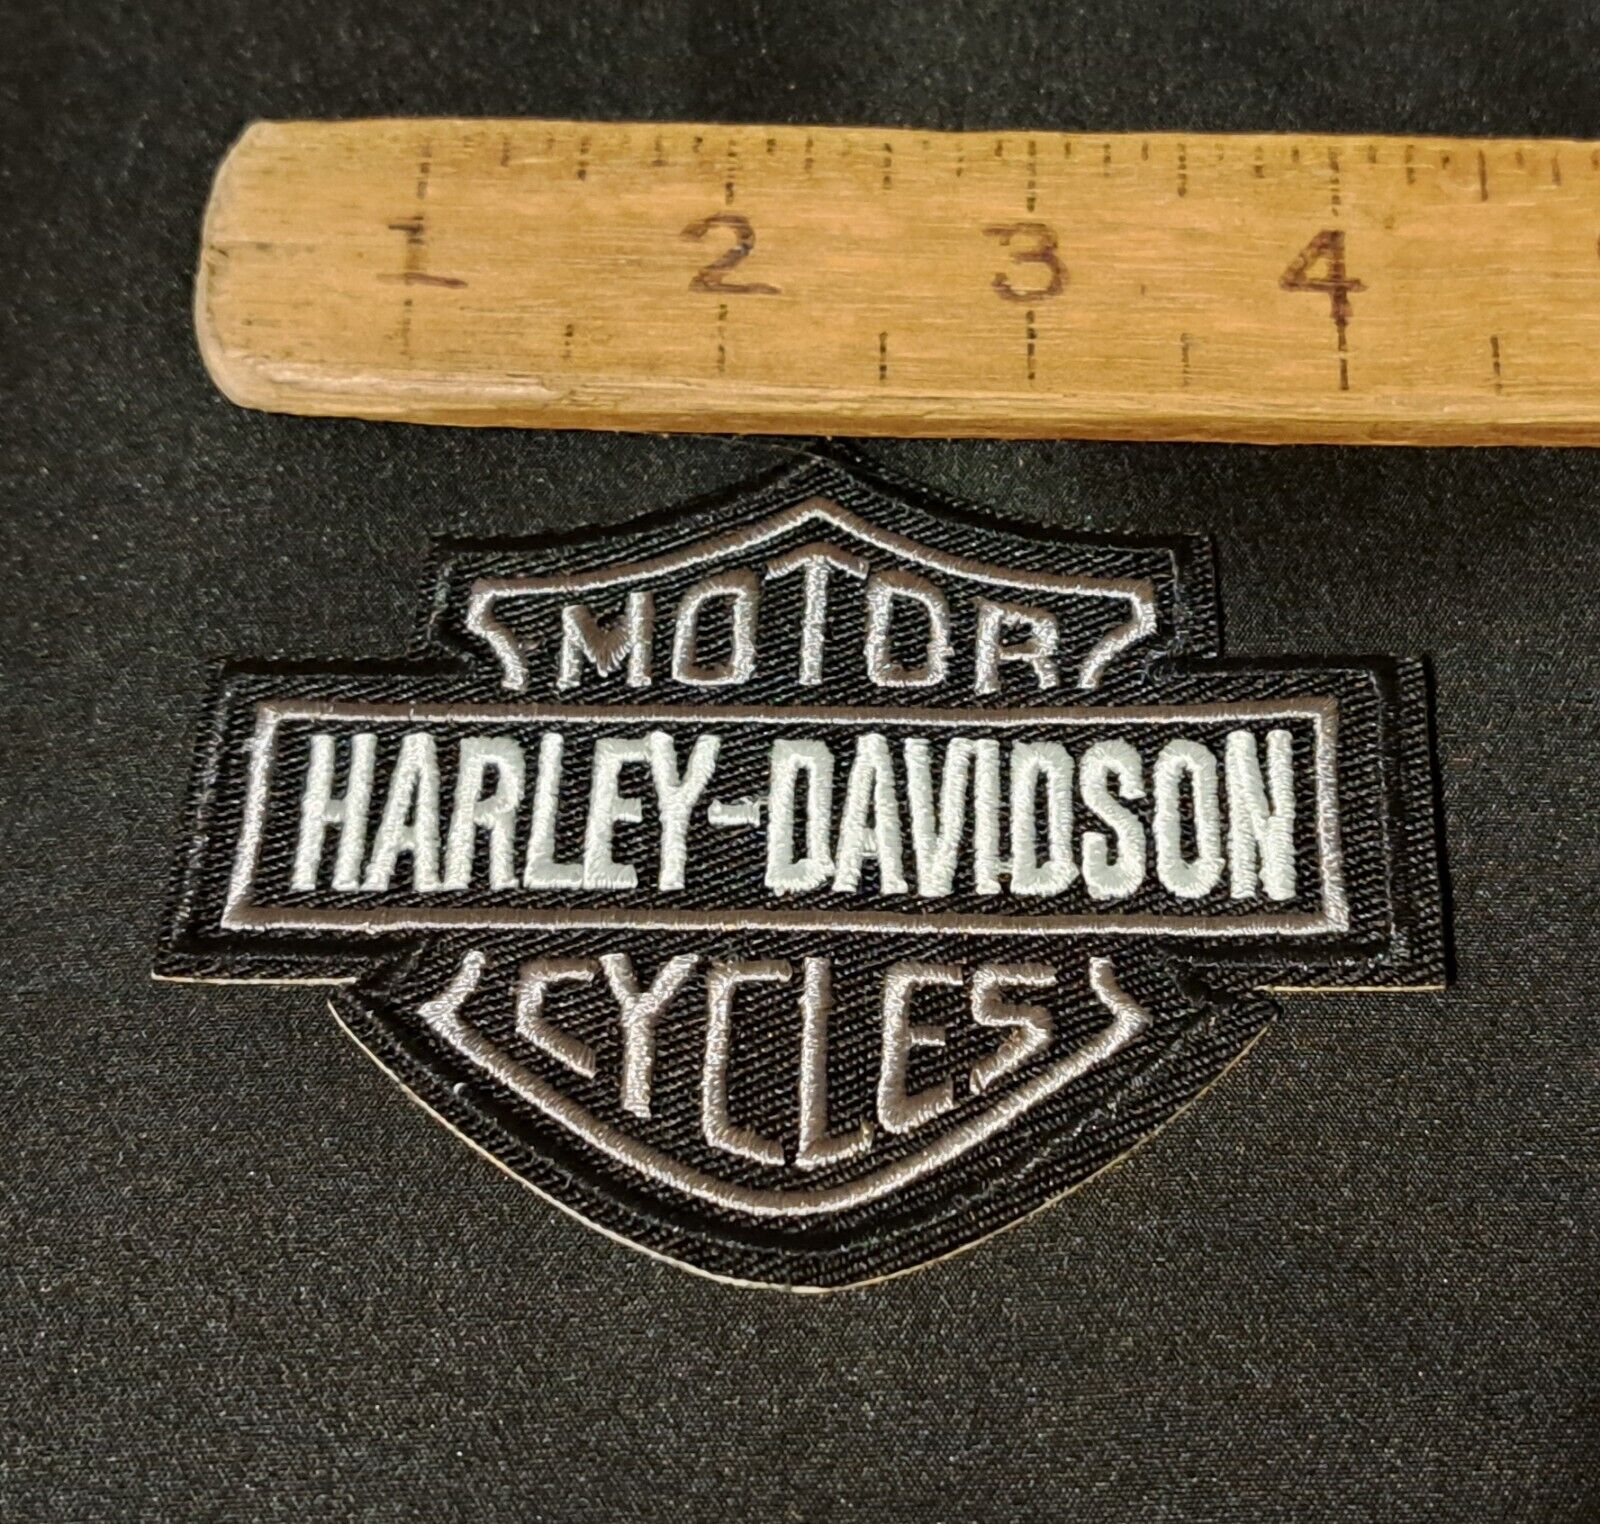 NEW silver Harley Davidson Sew on patch large NEW FREE P&P   4 INCH WIDE  